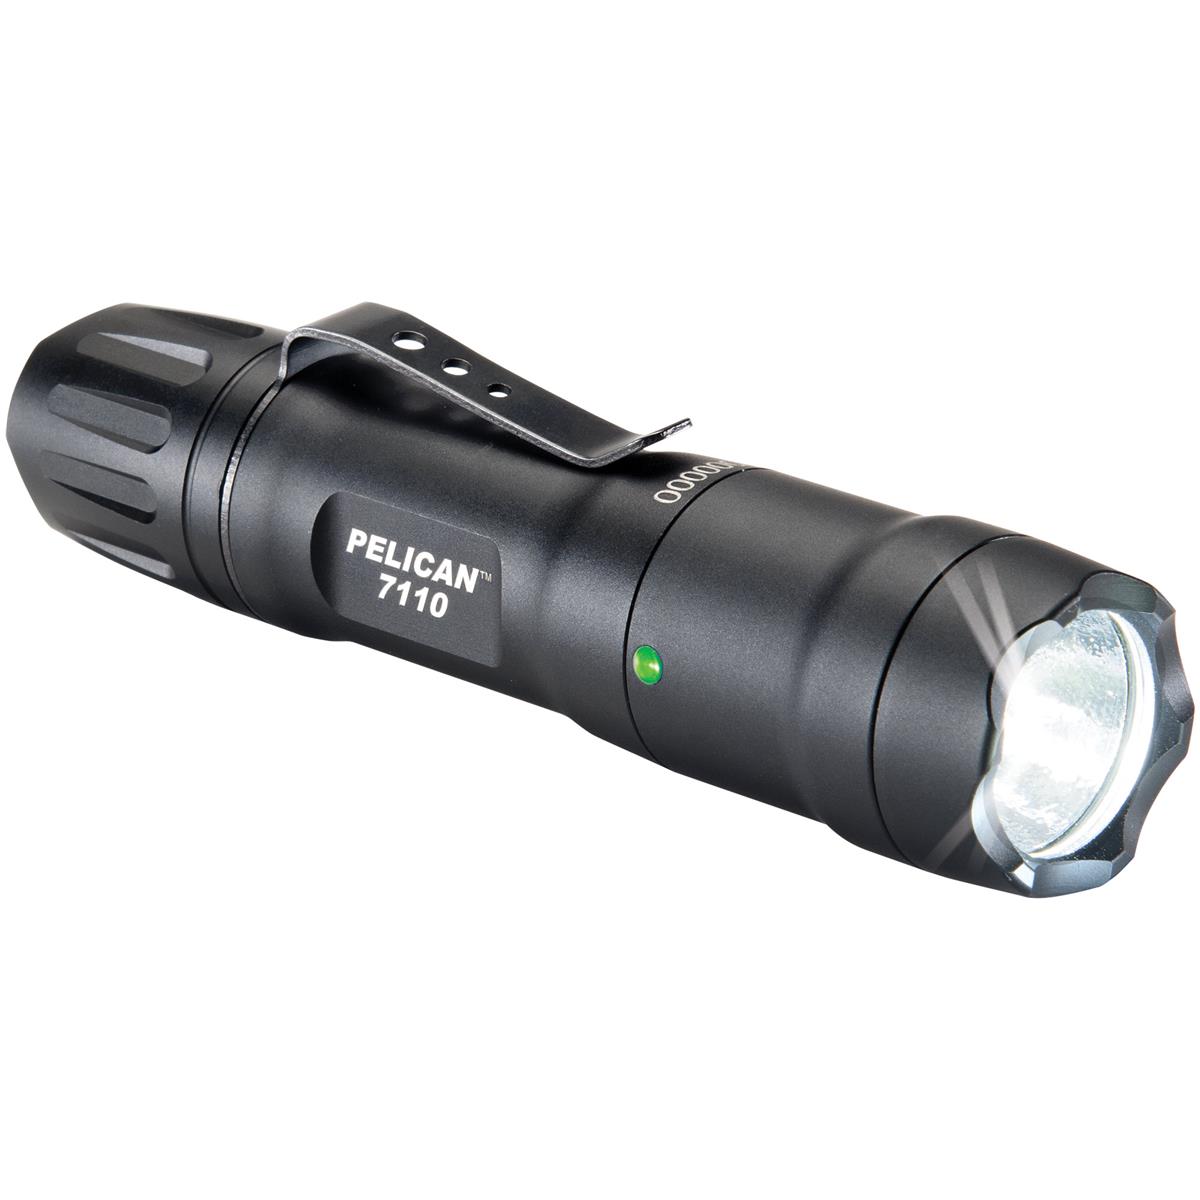 

Pelican 7110 Tactical LED Flashlight, 445 Lumens, AA or CR123 Battery Power